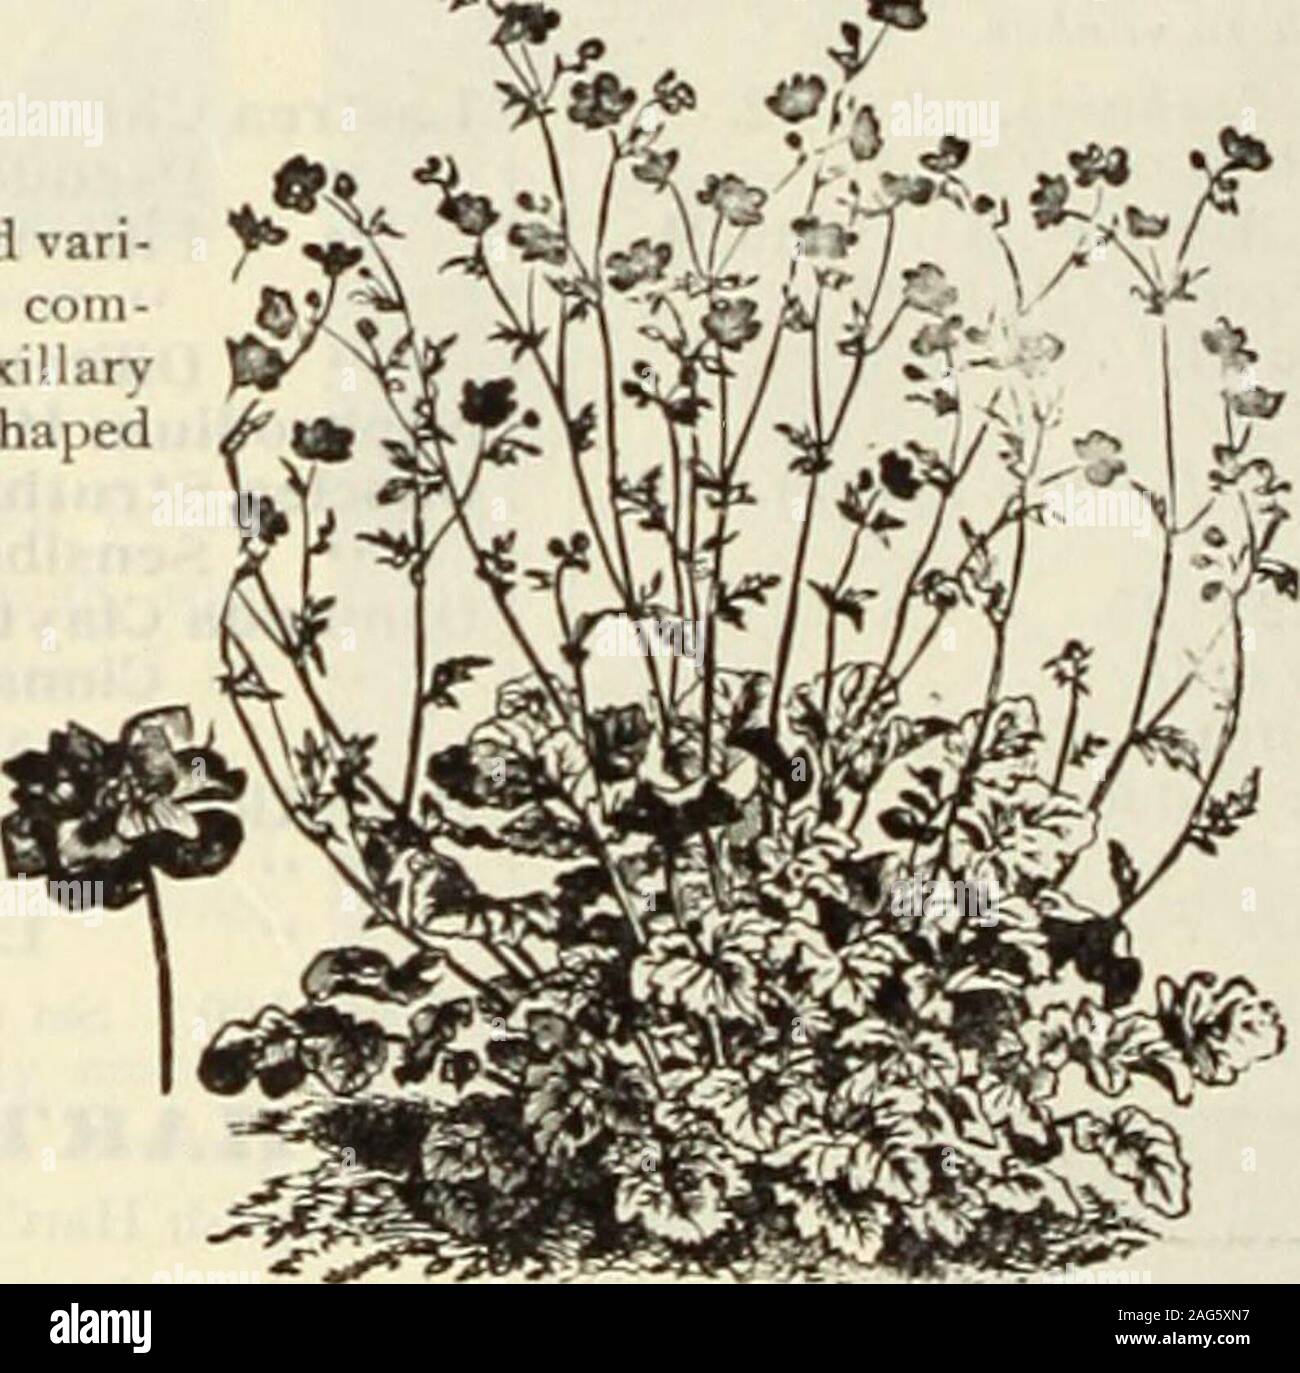 . Dreer's 1913 garden book. d, will retainits beauty for many months, furnishing most attractive decorative material inthis shape.Acutifolia. A strong-growing kind, attaining a height of 2 feet, with large panicles of small white flowers in July.Cerastioides. A fine variety for the rockery, growing but 3 inches high,and producing from June to August small white flowers marked with pink.Paniculata. A beautiful old-fashioned plant, possessing a grace not found,in any other perennial. When in bloom during August and September itforms a symmetrical mass 2 to 3 feet in height, and as much through, Stock Photo